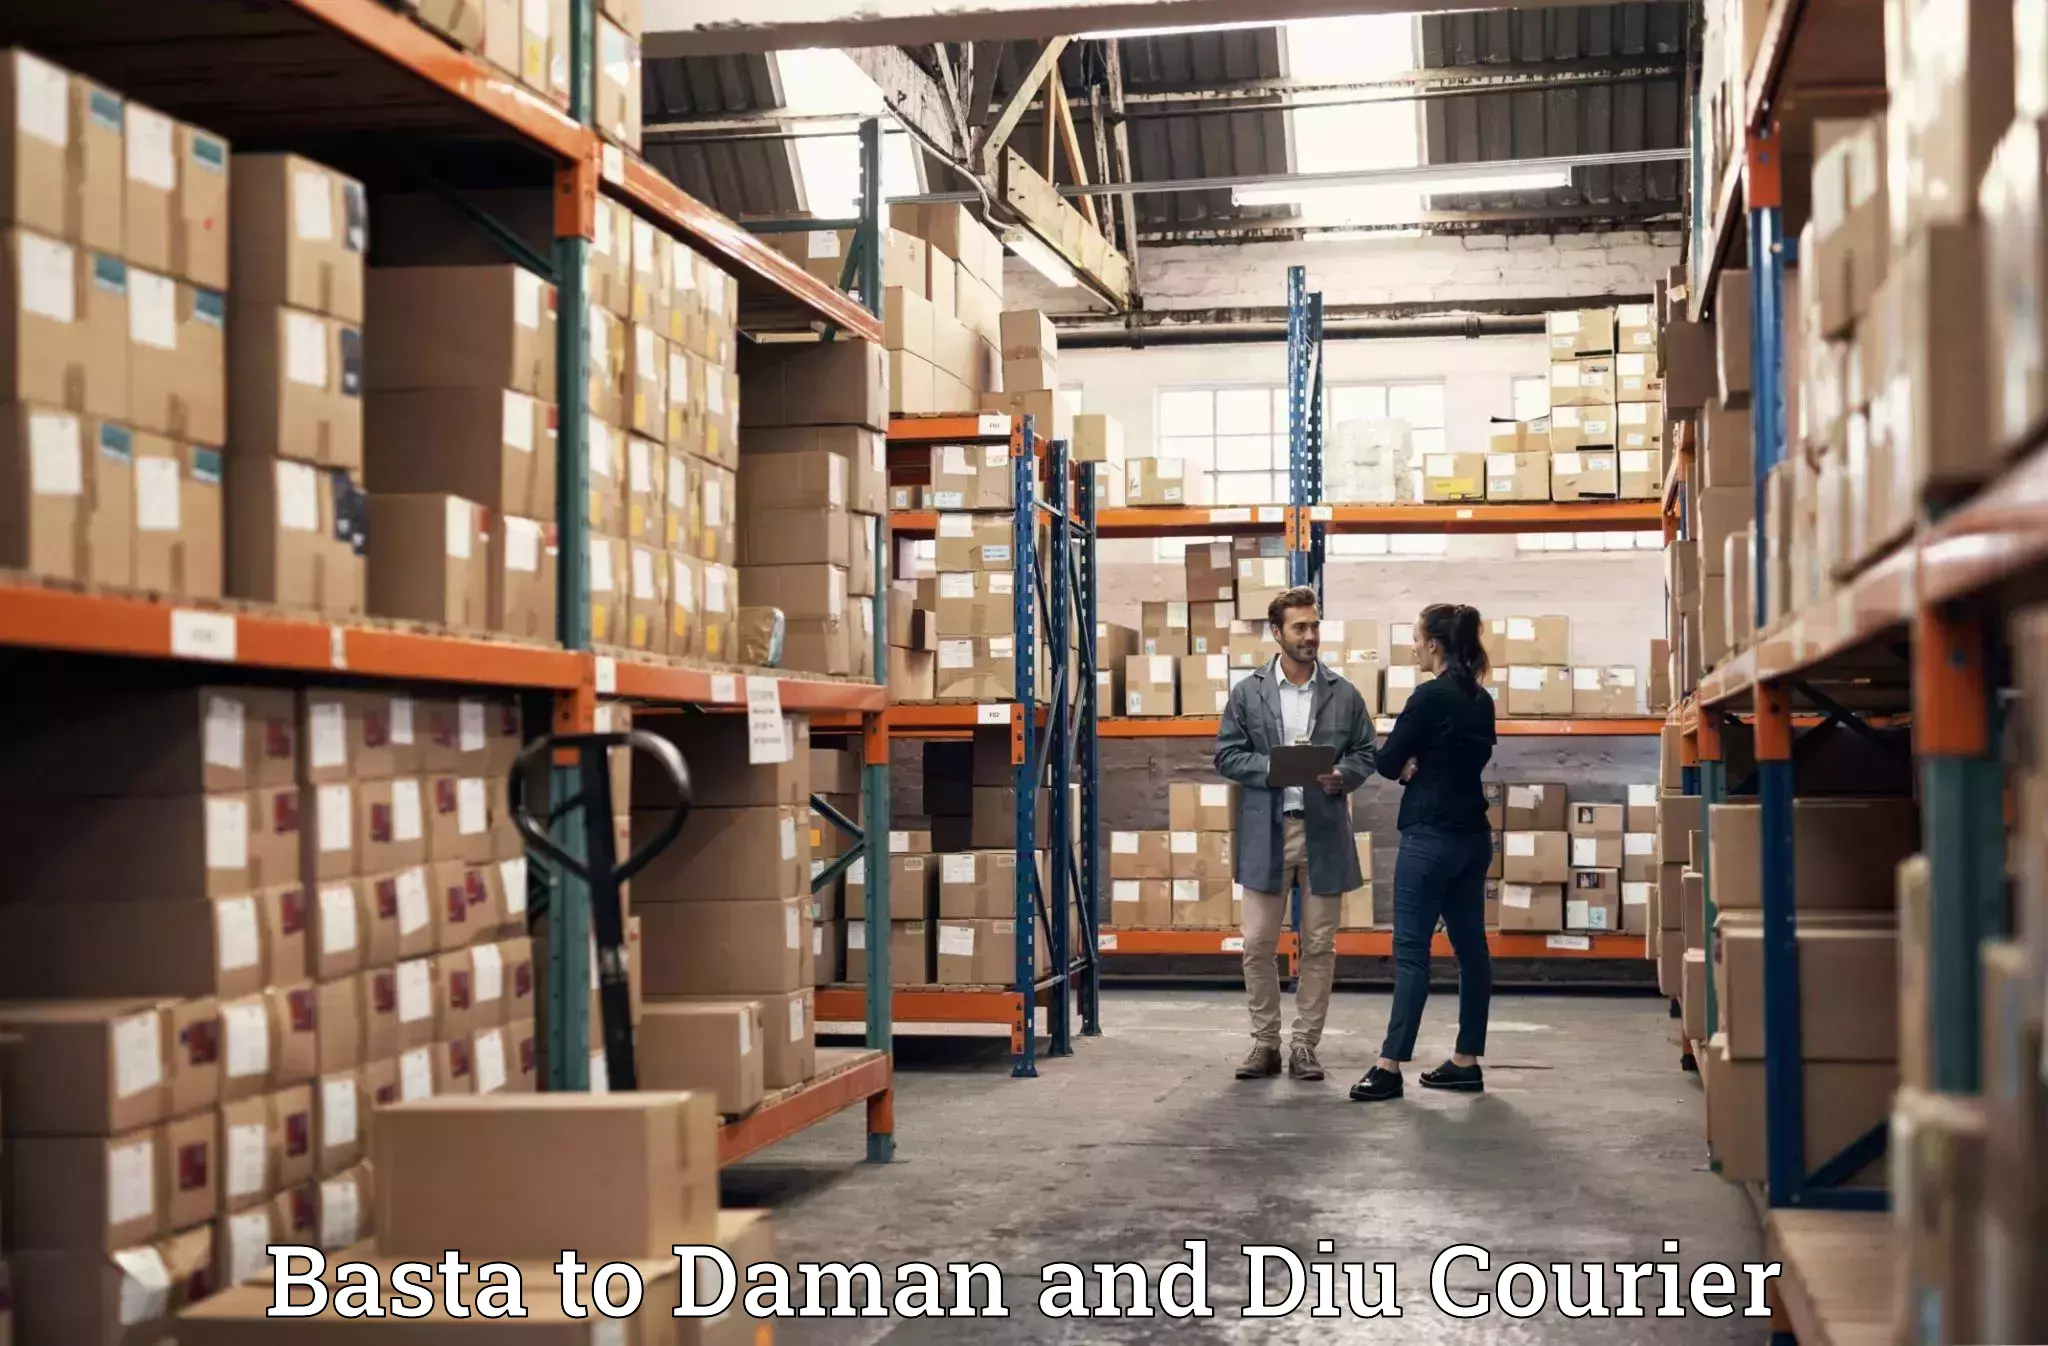 Trusted relocation experts Basta to Daman and Diu